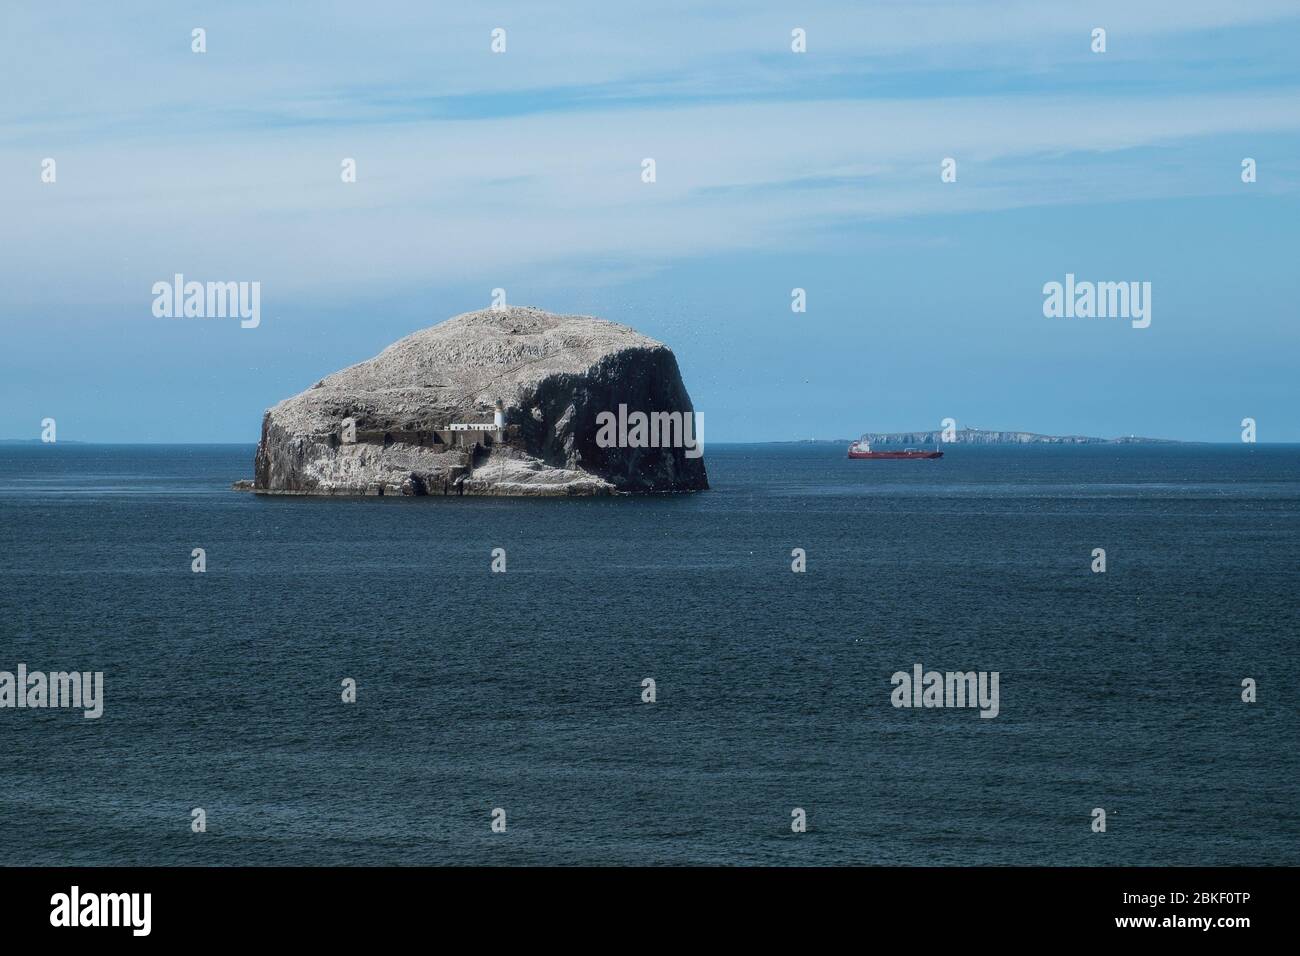 Lighthouse on a cliff, sea, seagulls and red ship. Bass Rock, Scotland, United Kingdom Stock Photo